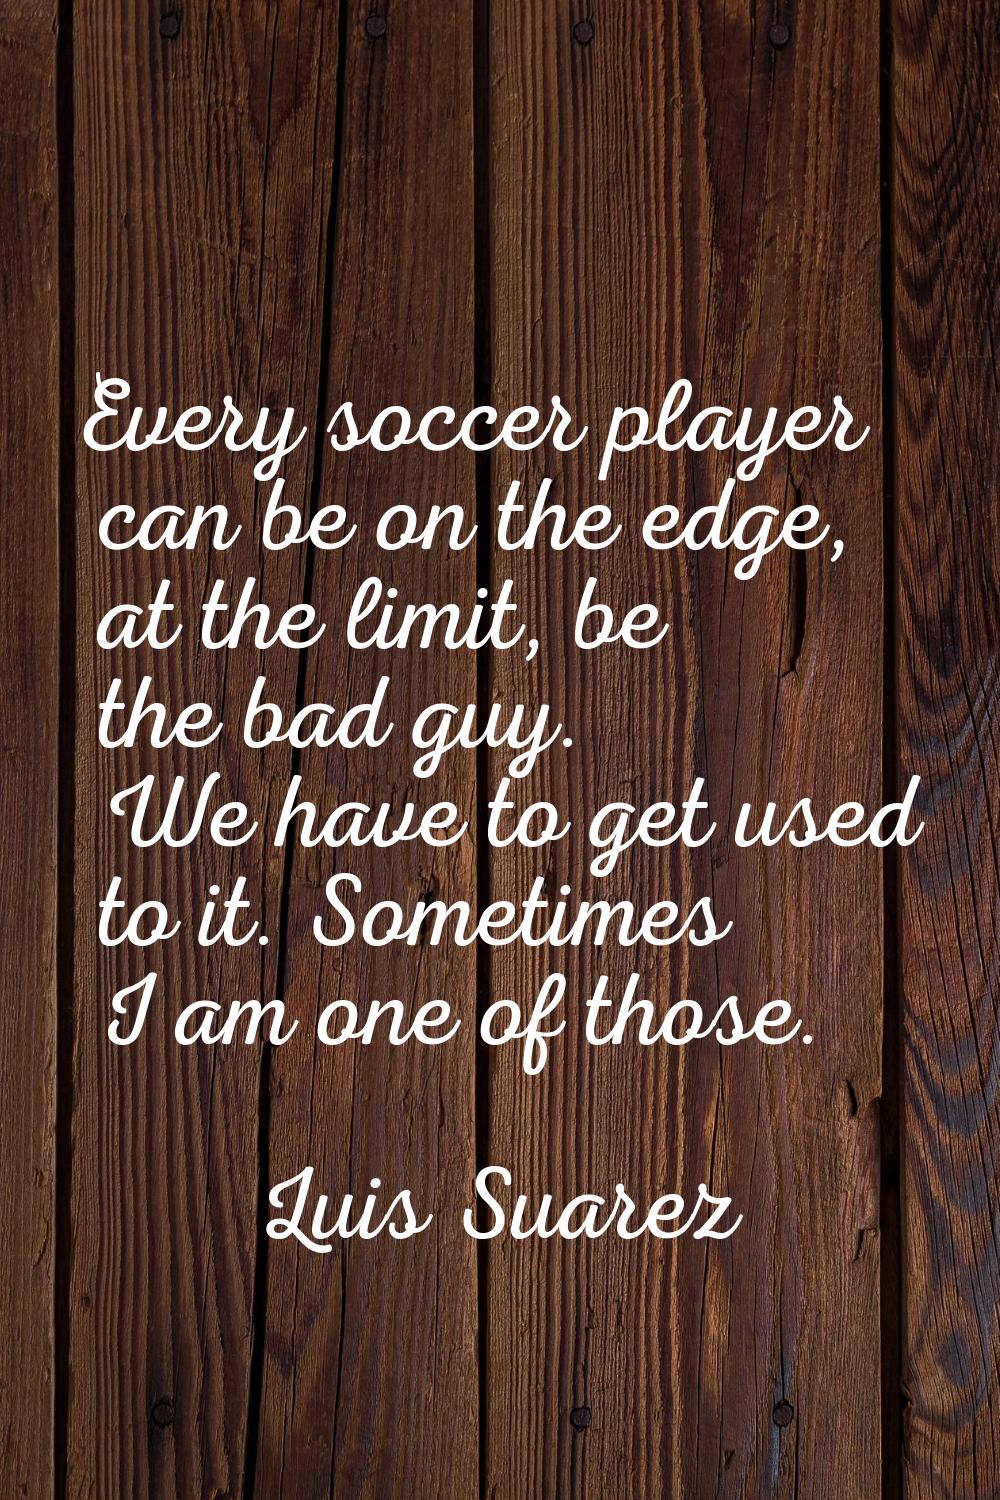 Every soccer player can be on the edge, at the limit, be the bad guy. We have to get used to it. So